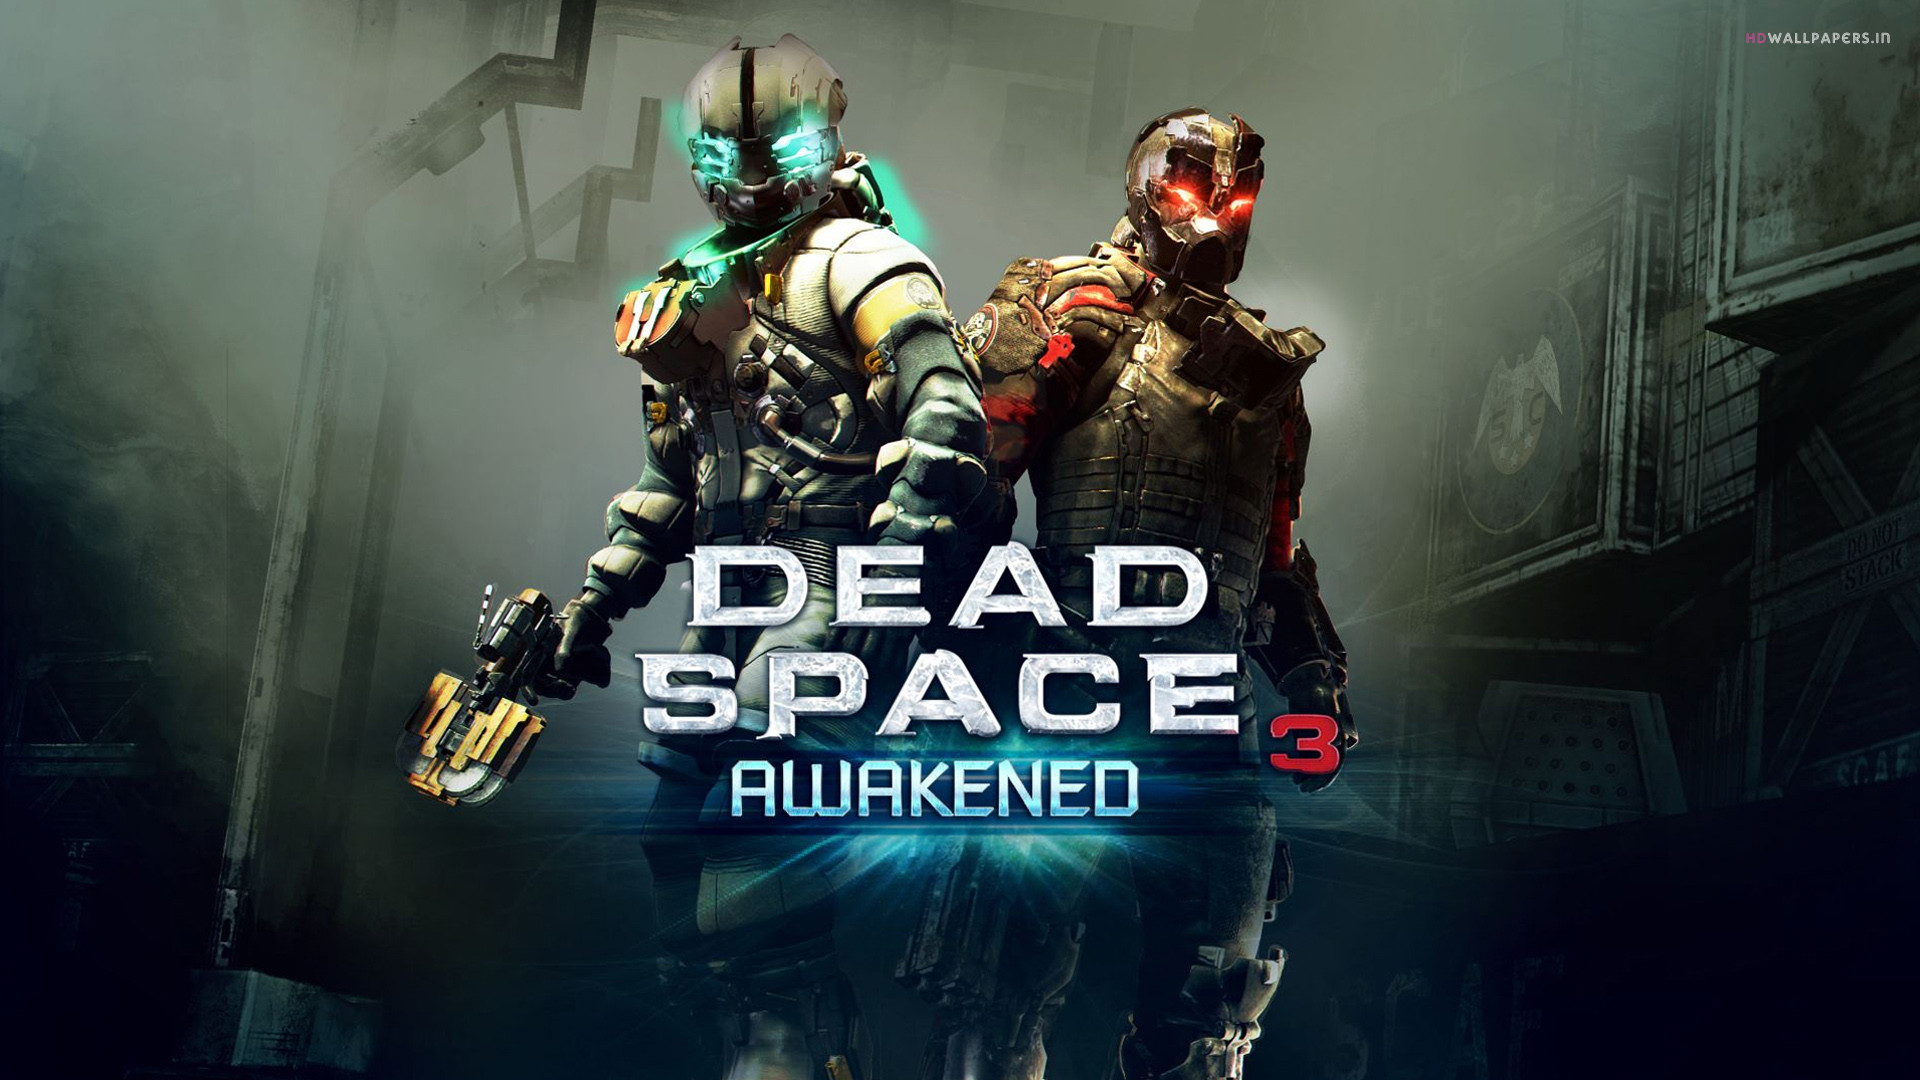 Related For Dead Space Hd Wallpaper 1920x1080